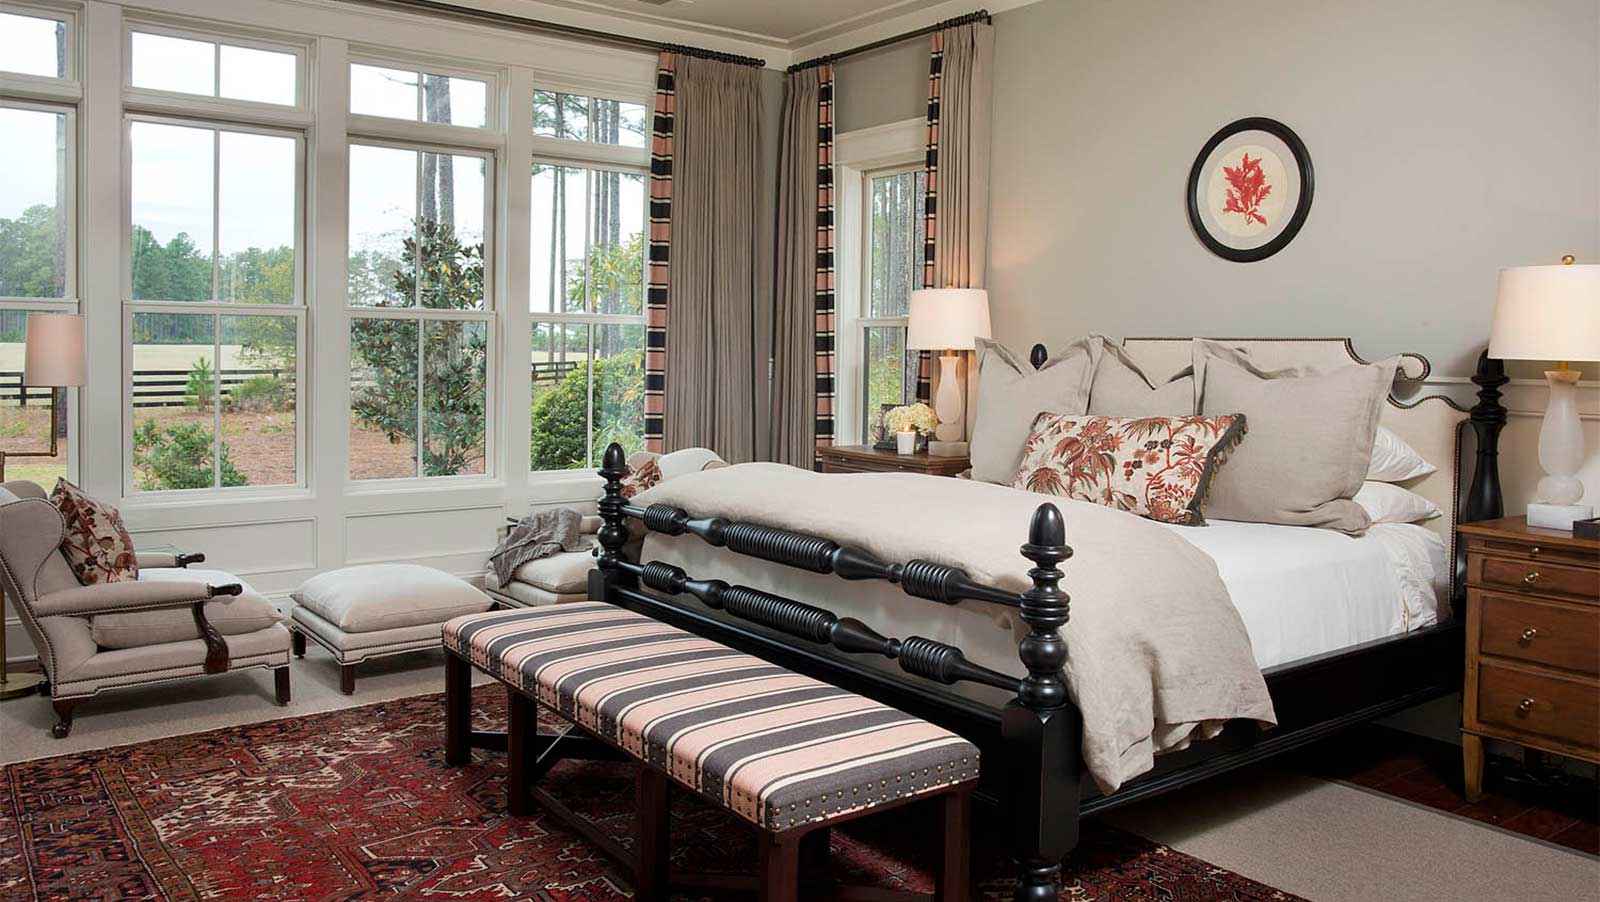 luxury interior design by the j banks design group includes residential master bedrooms in warm traditional styles